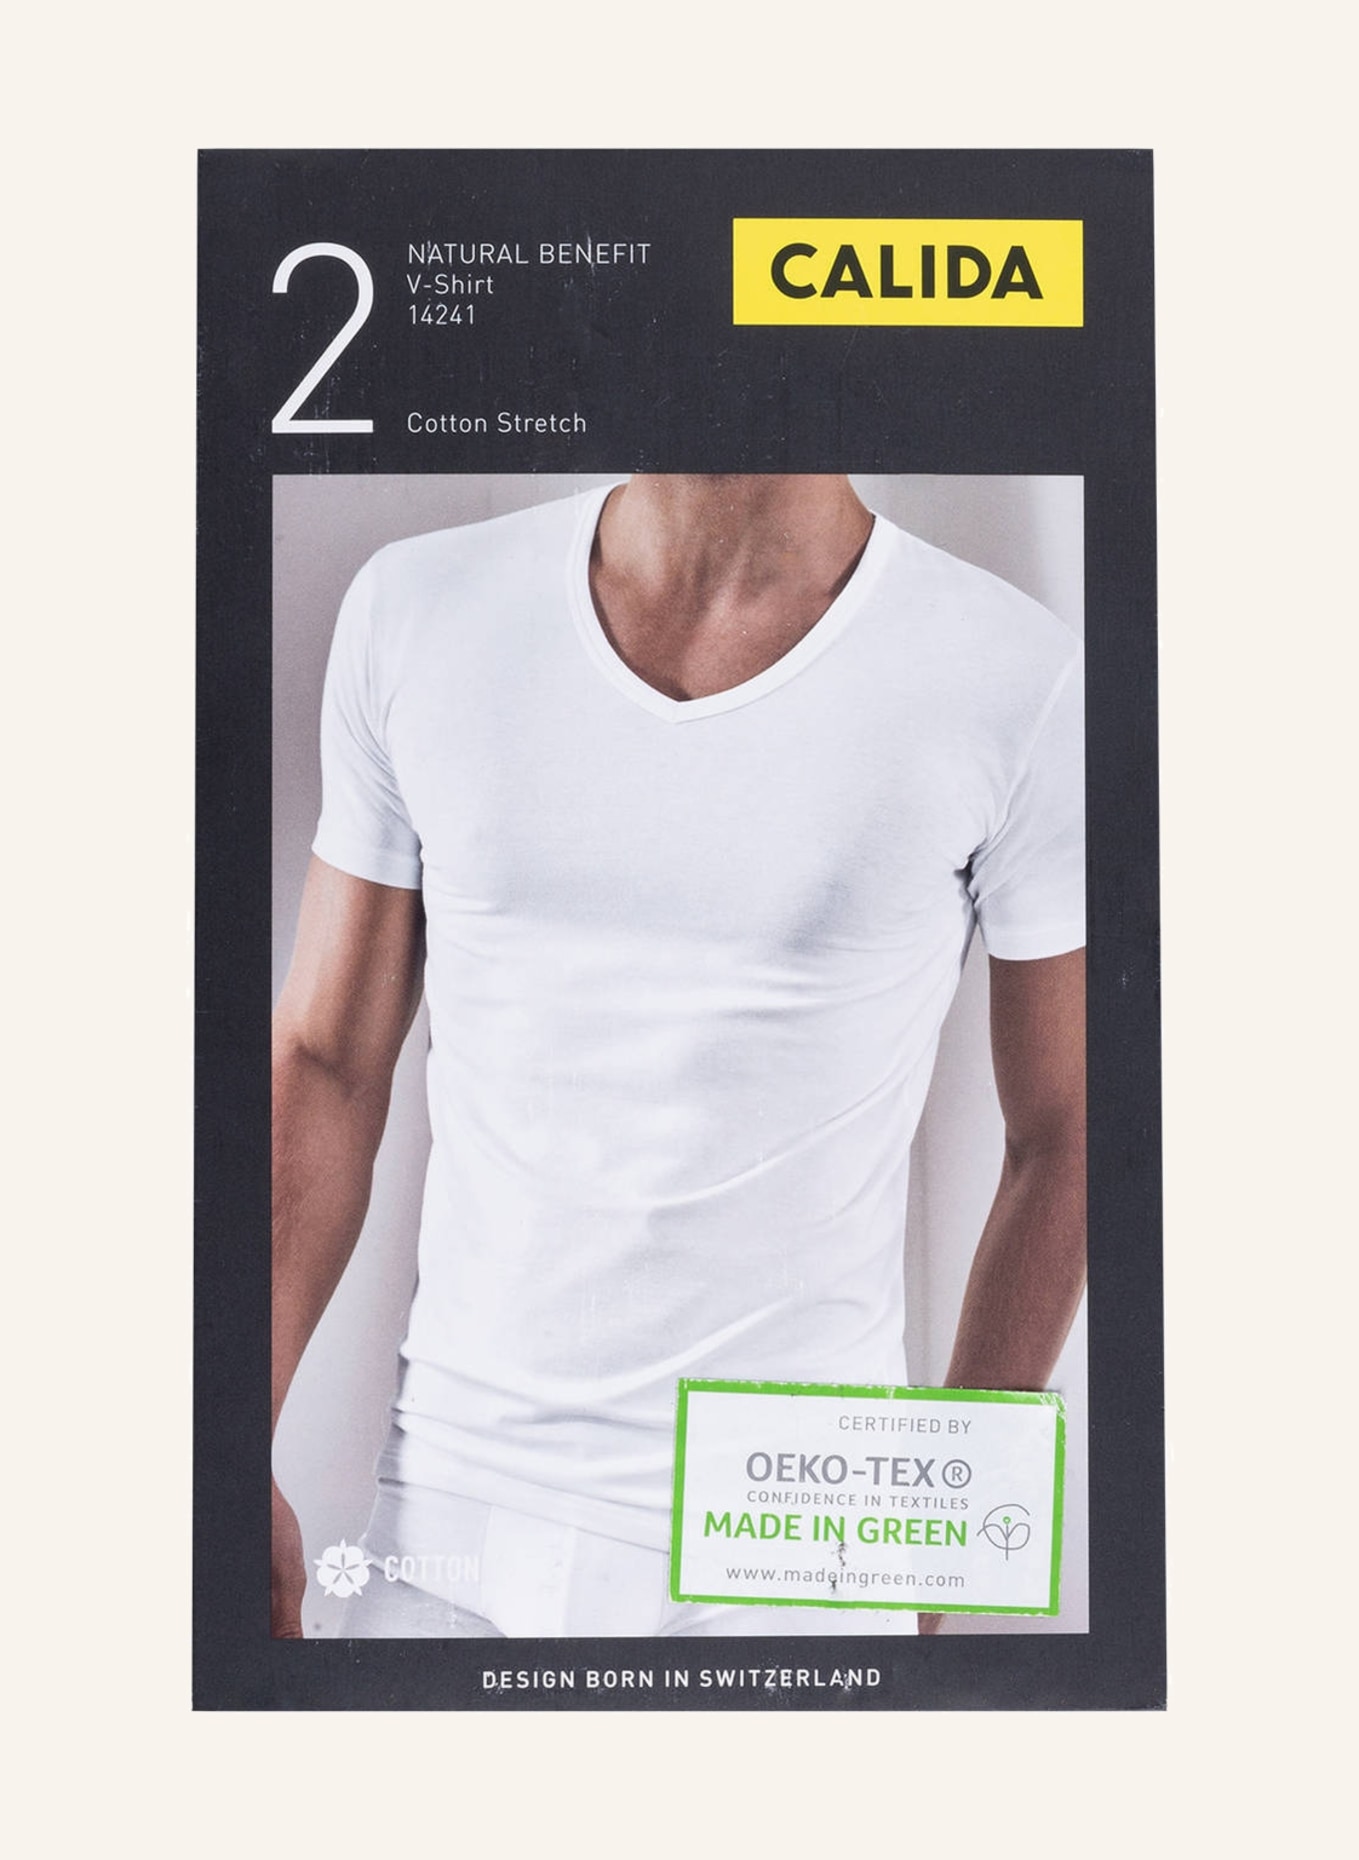 V-Shirts weiss in 2er-Pack CALIDA BENEFIT NATURAL